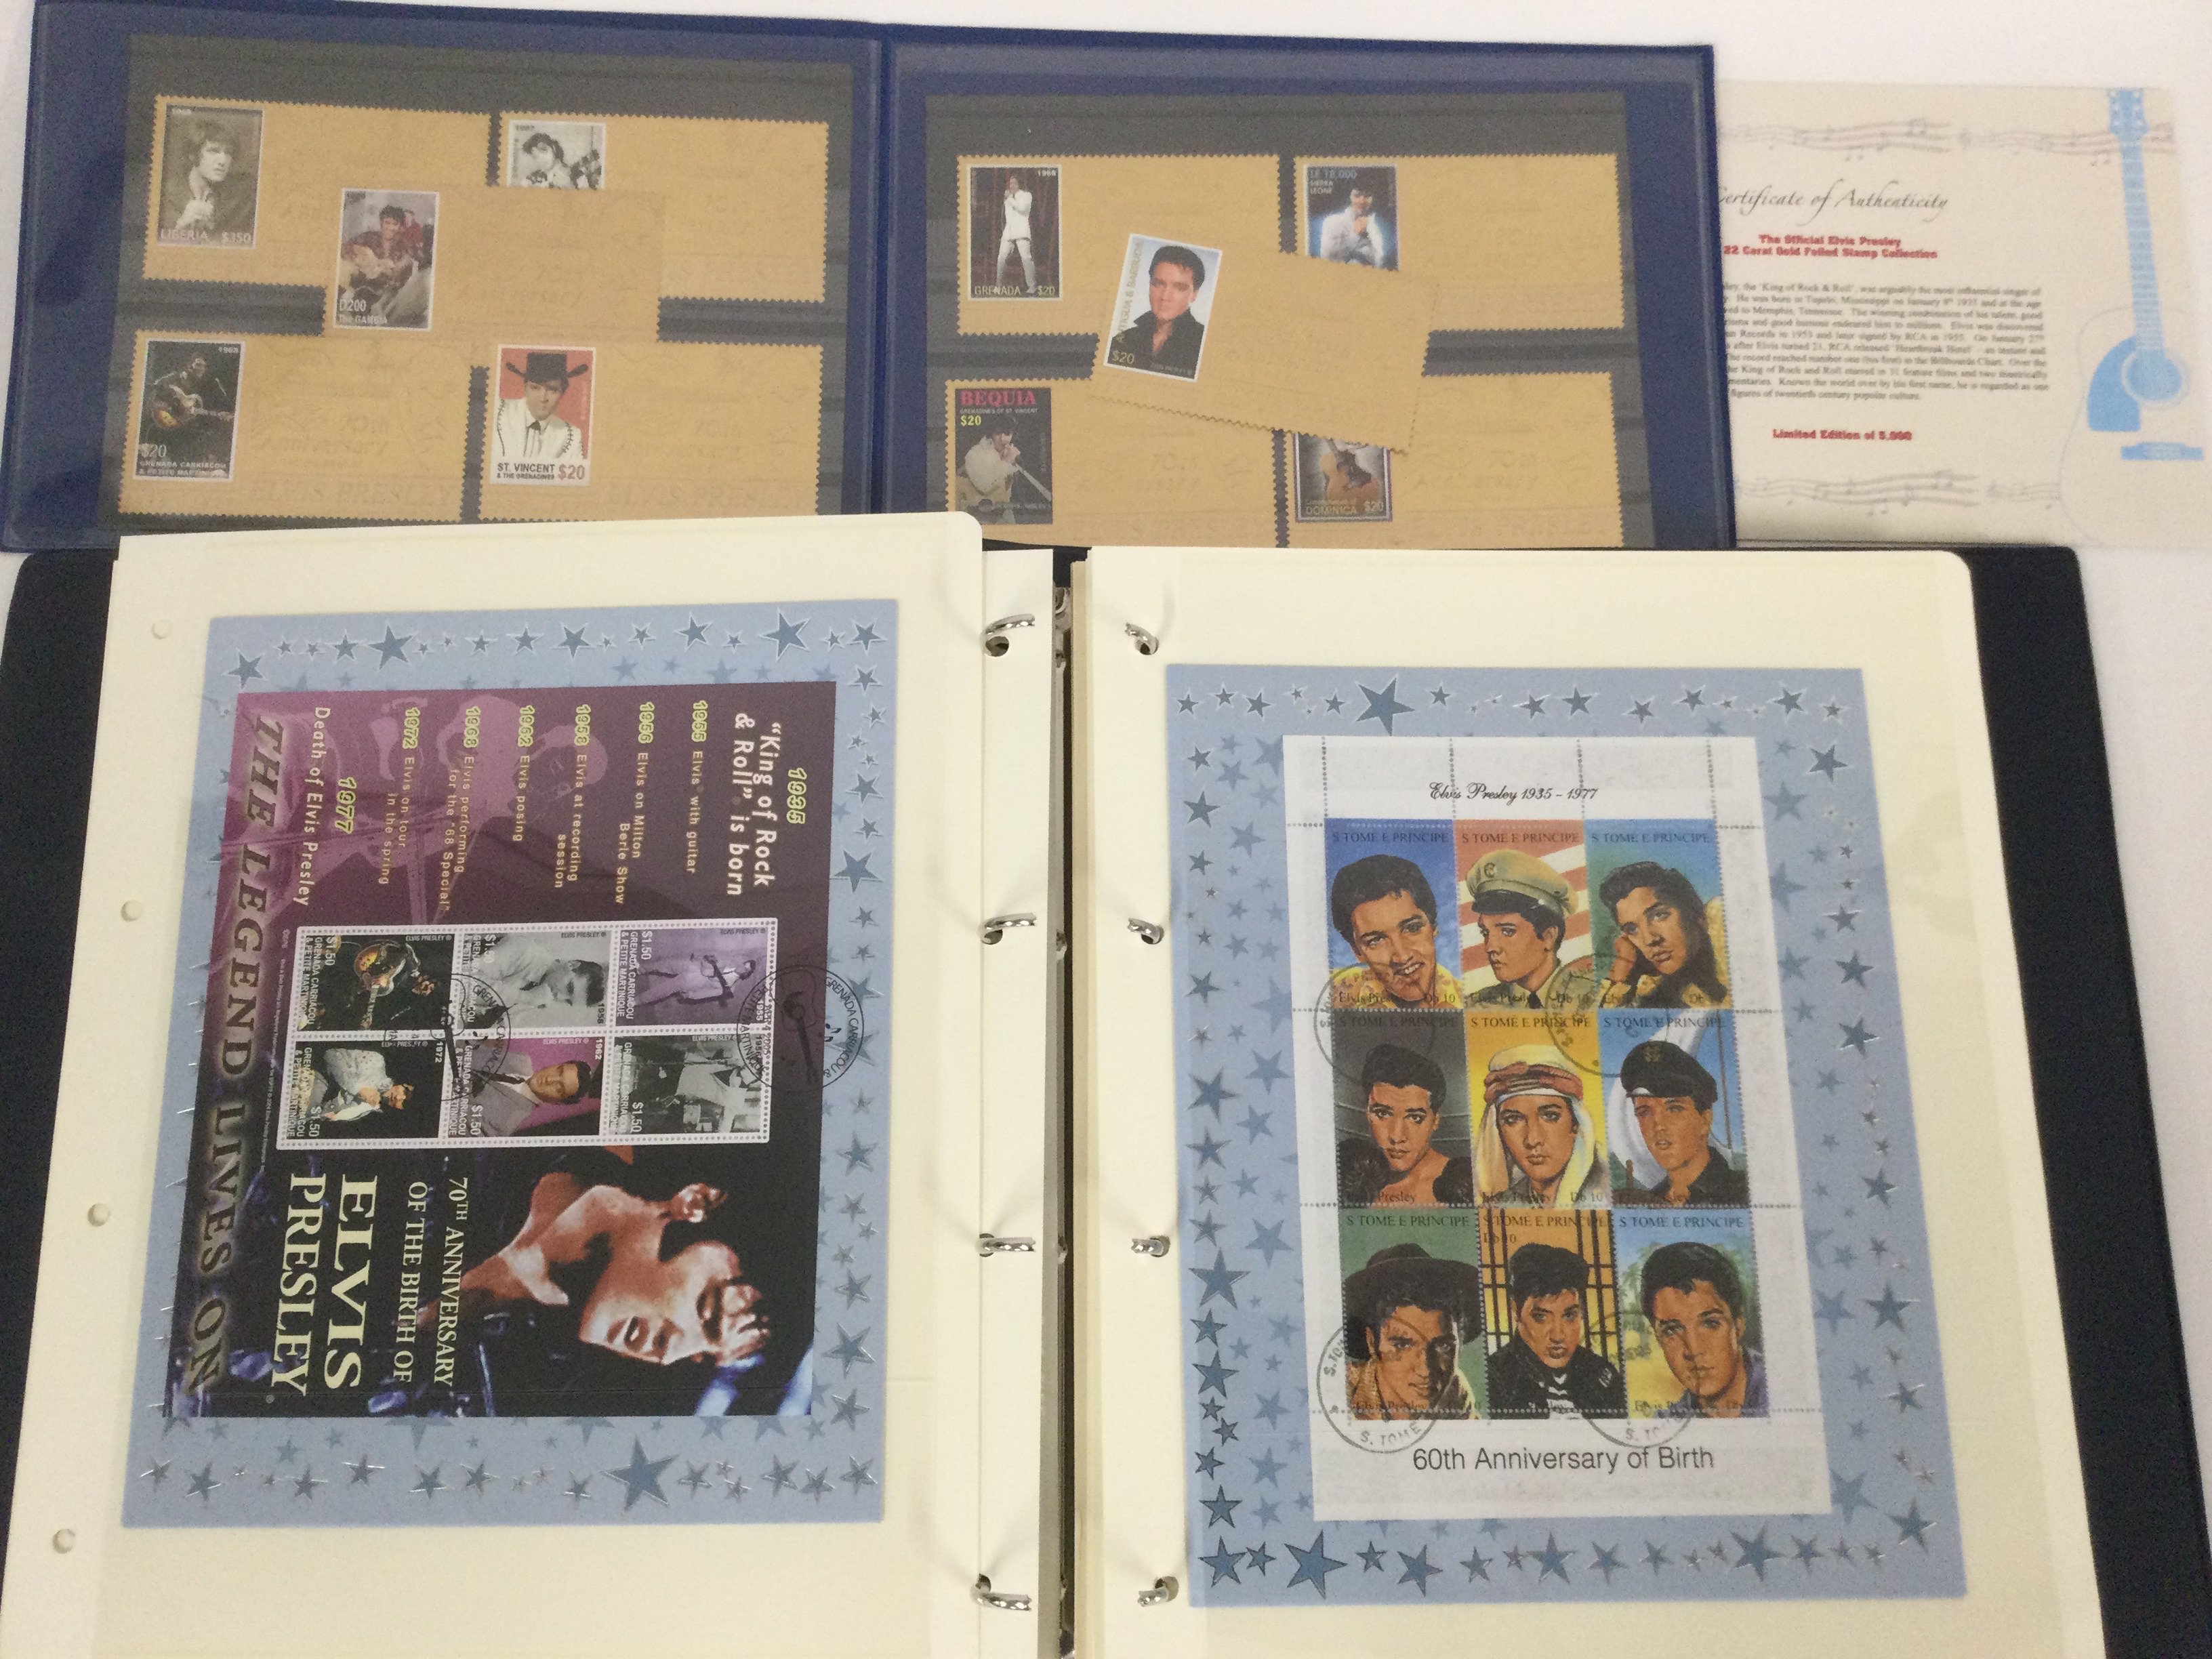 A collection of Elvis Presley stamps in two binder